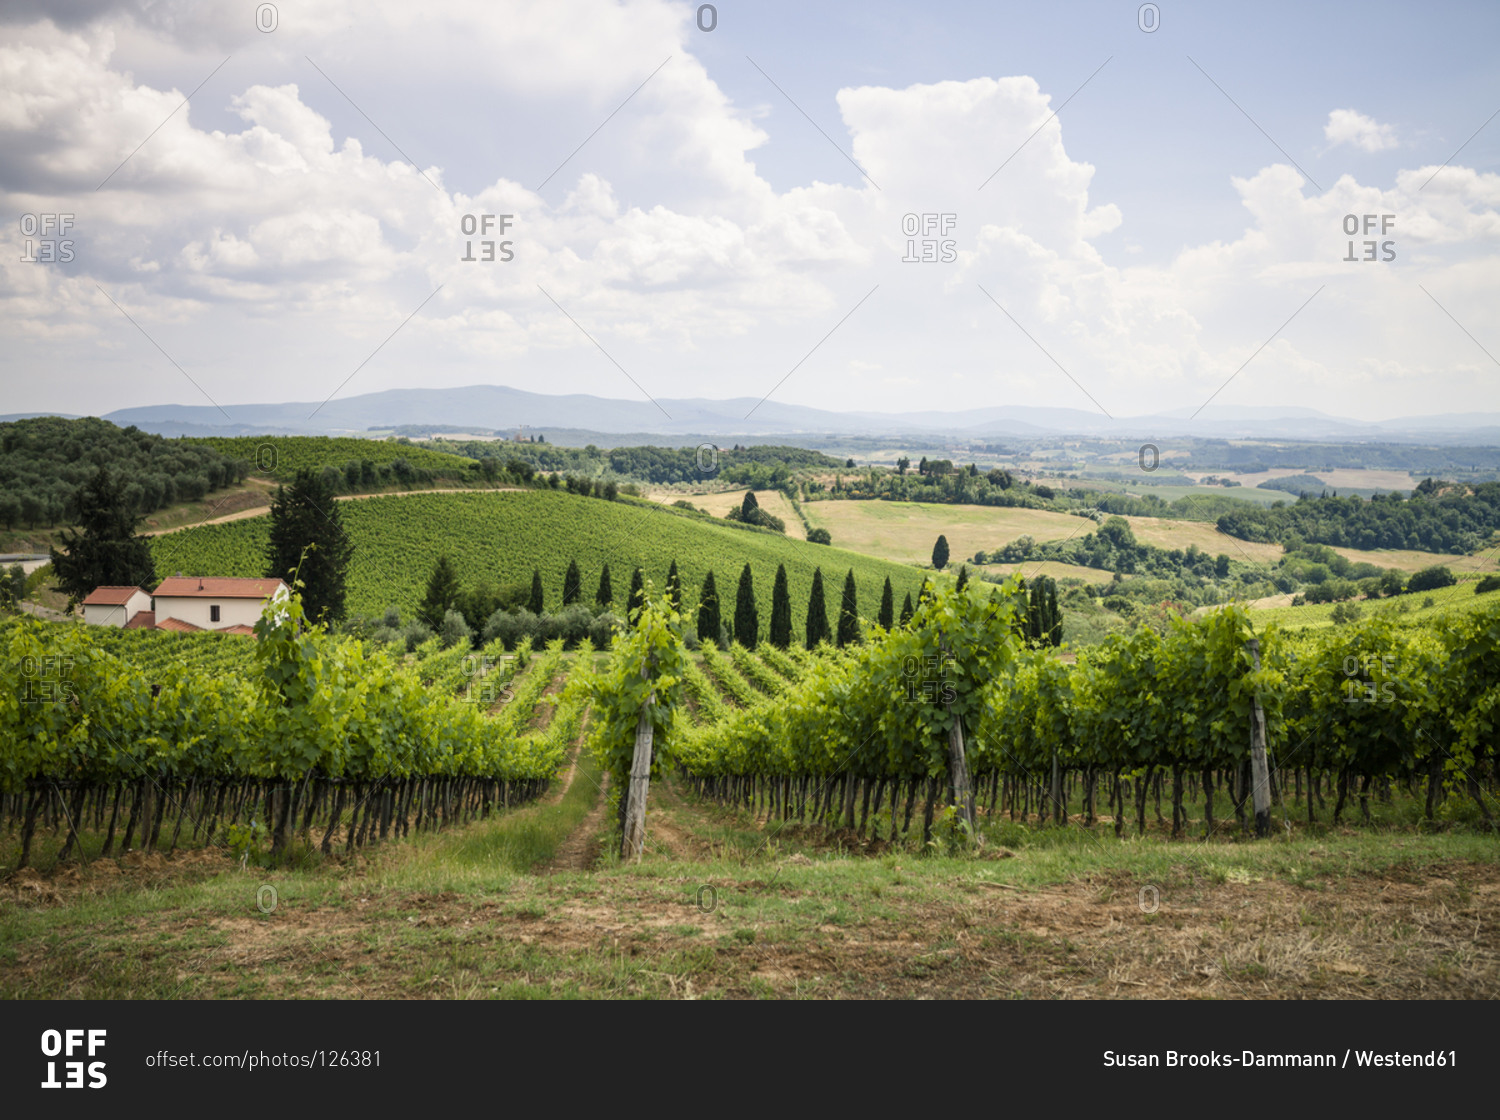 Tuscan landscape with grape vines